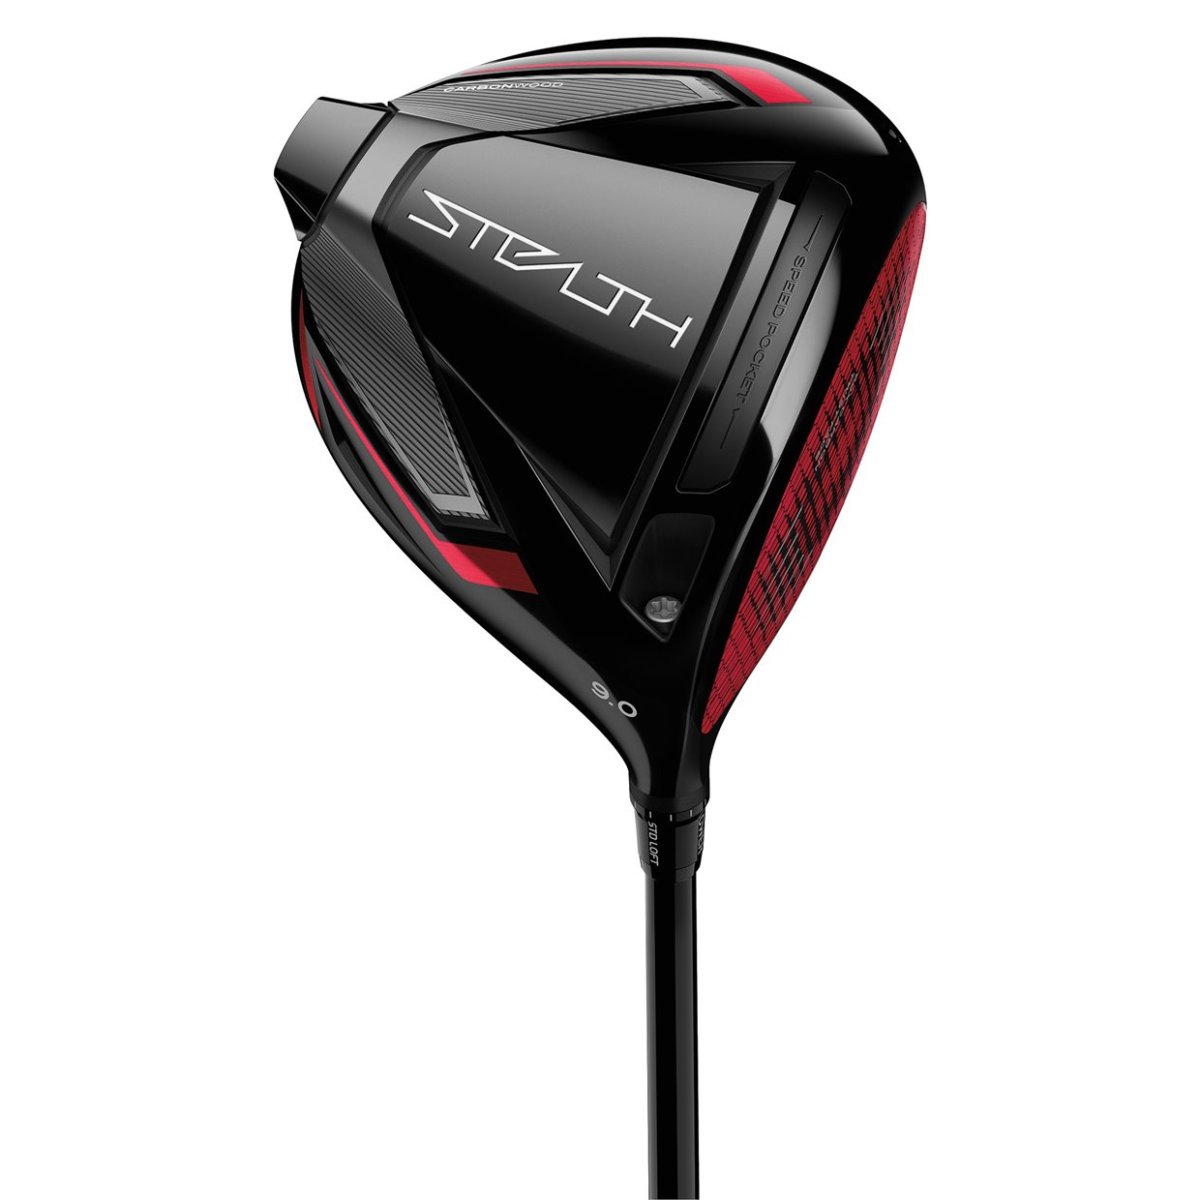 The TaylorMade Stealth driver, released in 2022, is available on Morning Read's Pro Shop, powered by GlobalGolf.